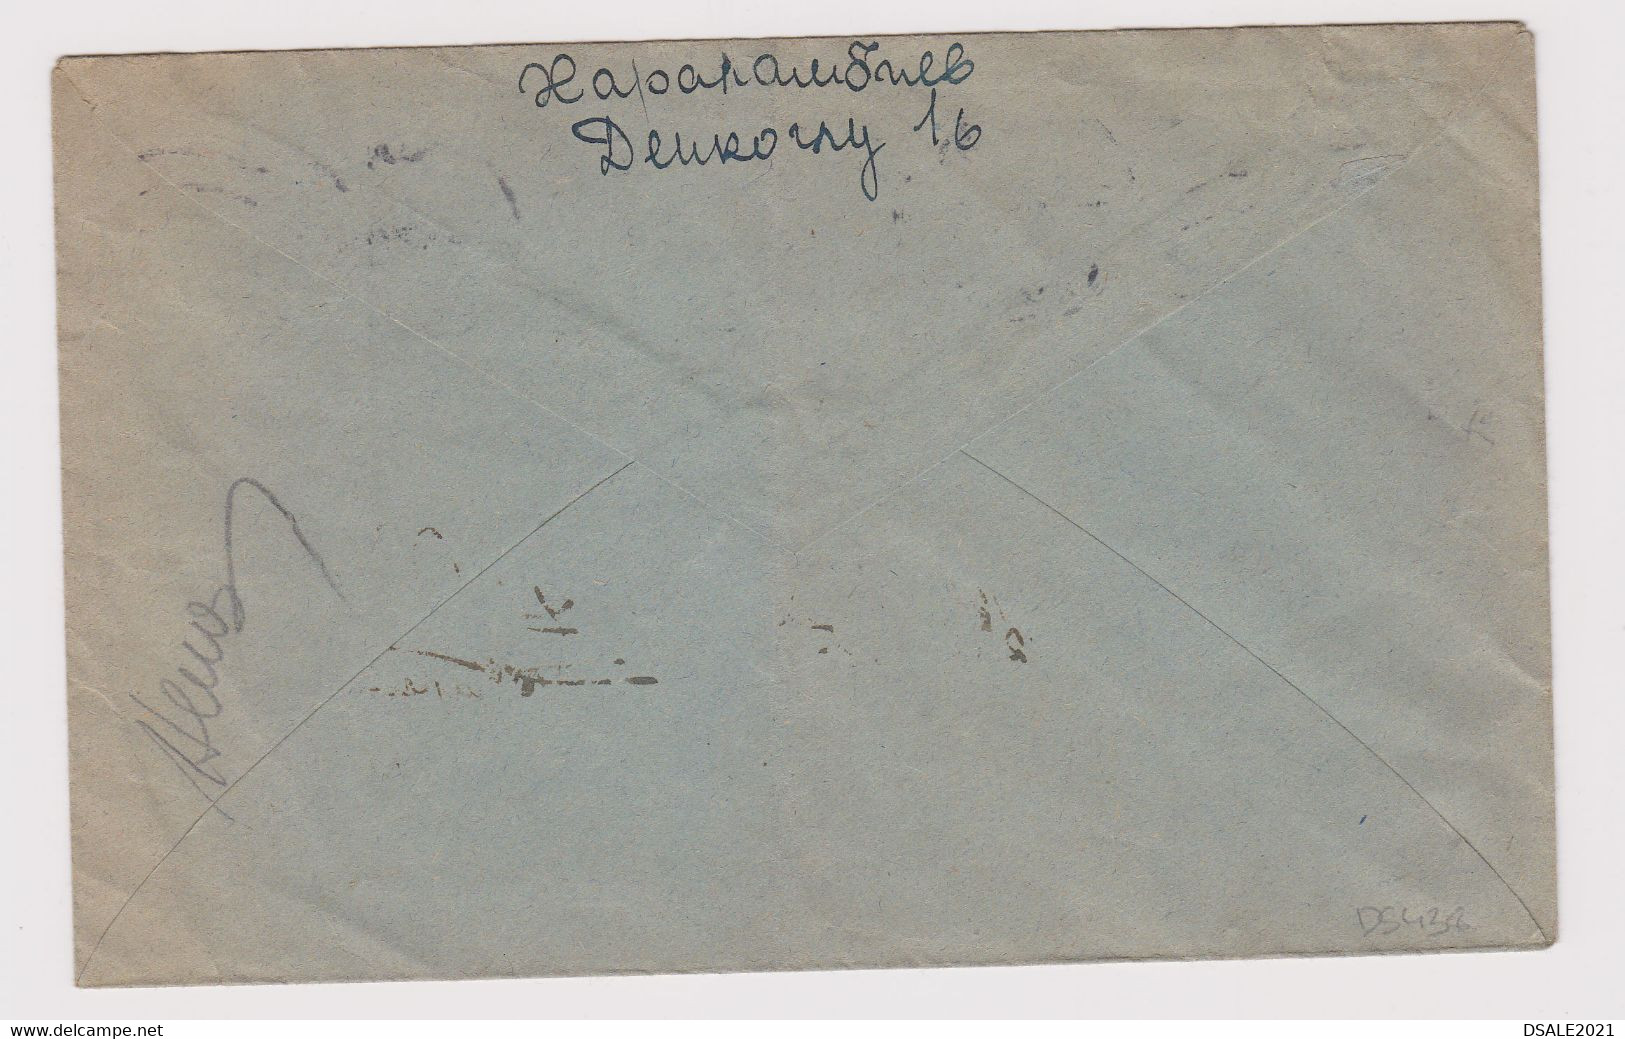 Bulgaria Bulgarie Bulgarije 1947 Cover W/Mi-Nr.517/4Lv. Topic Stamp Red Cross Wounded Soldier Domestic Used (ds438) - Briefe U. Dokumente